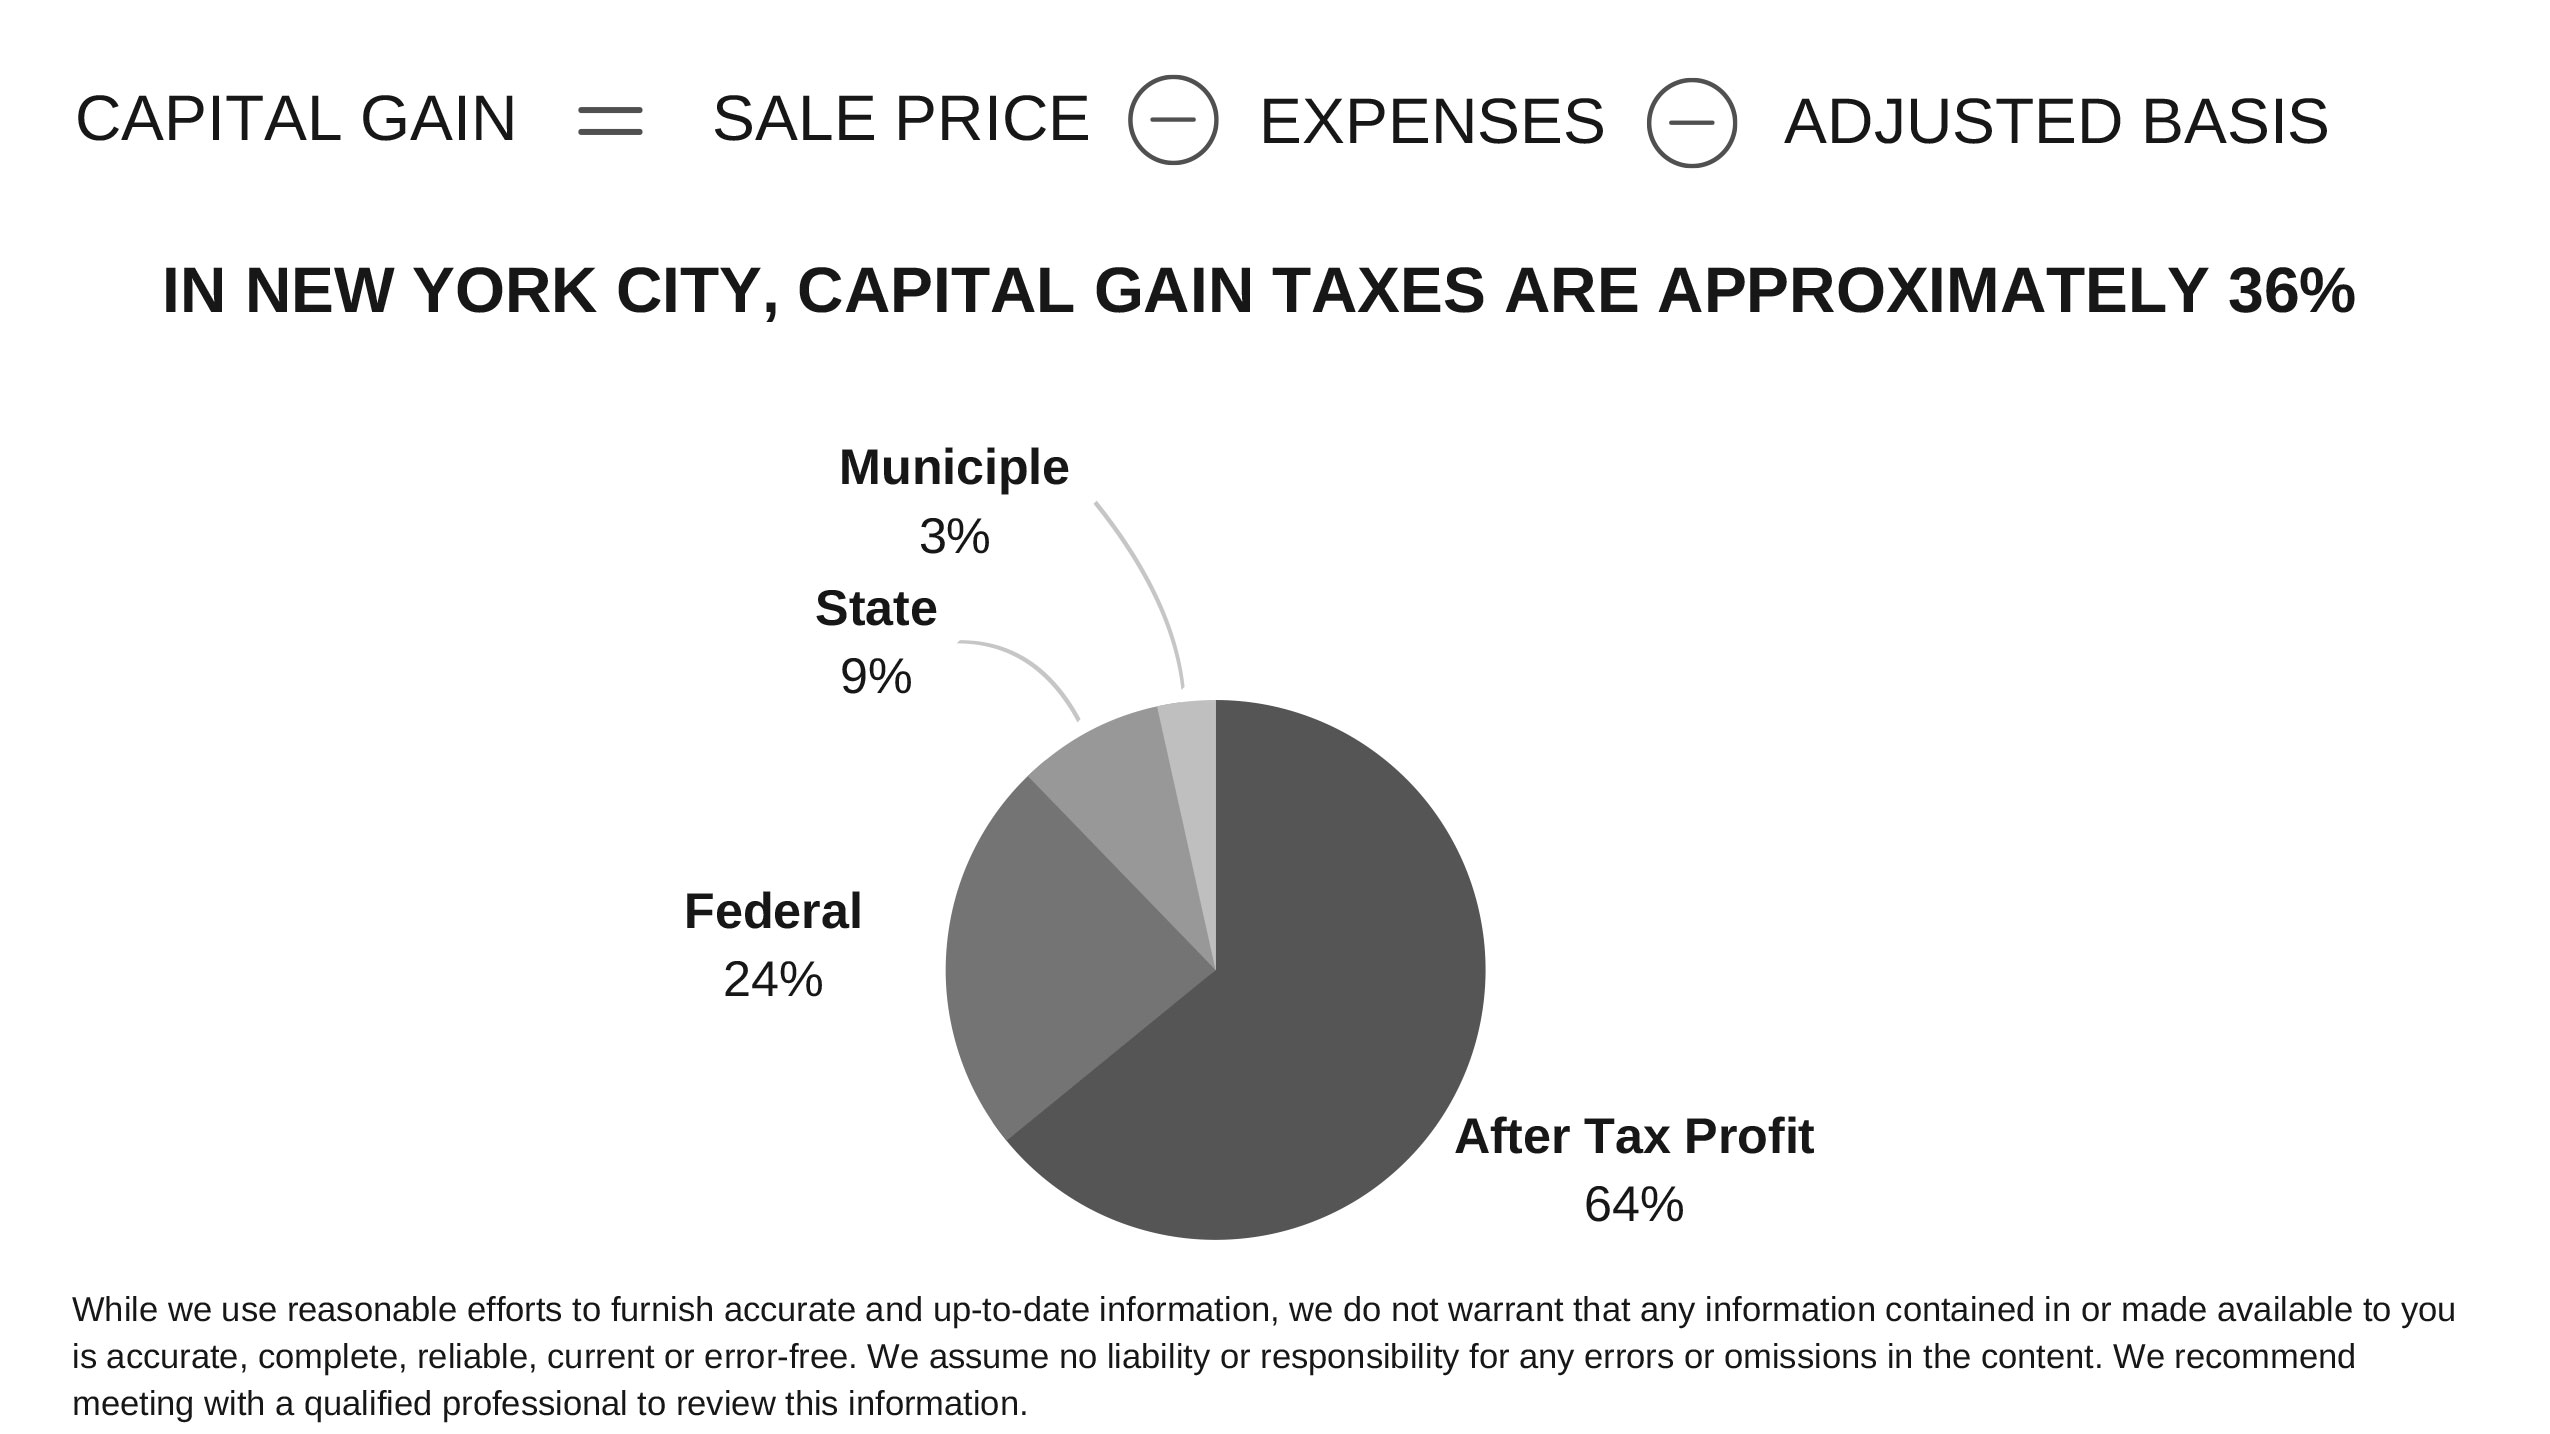 In NYC, capital gain taxes are approximately 36%